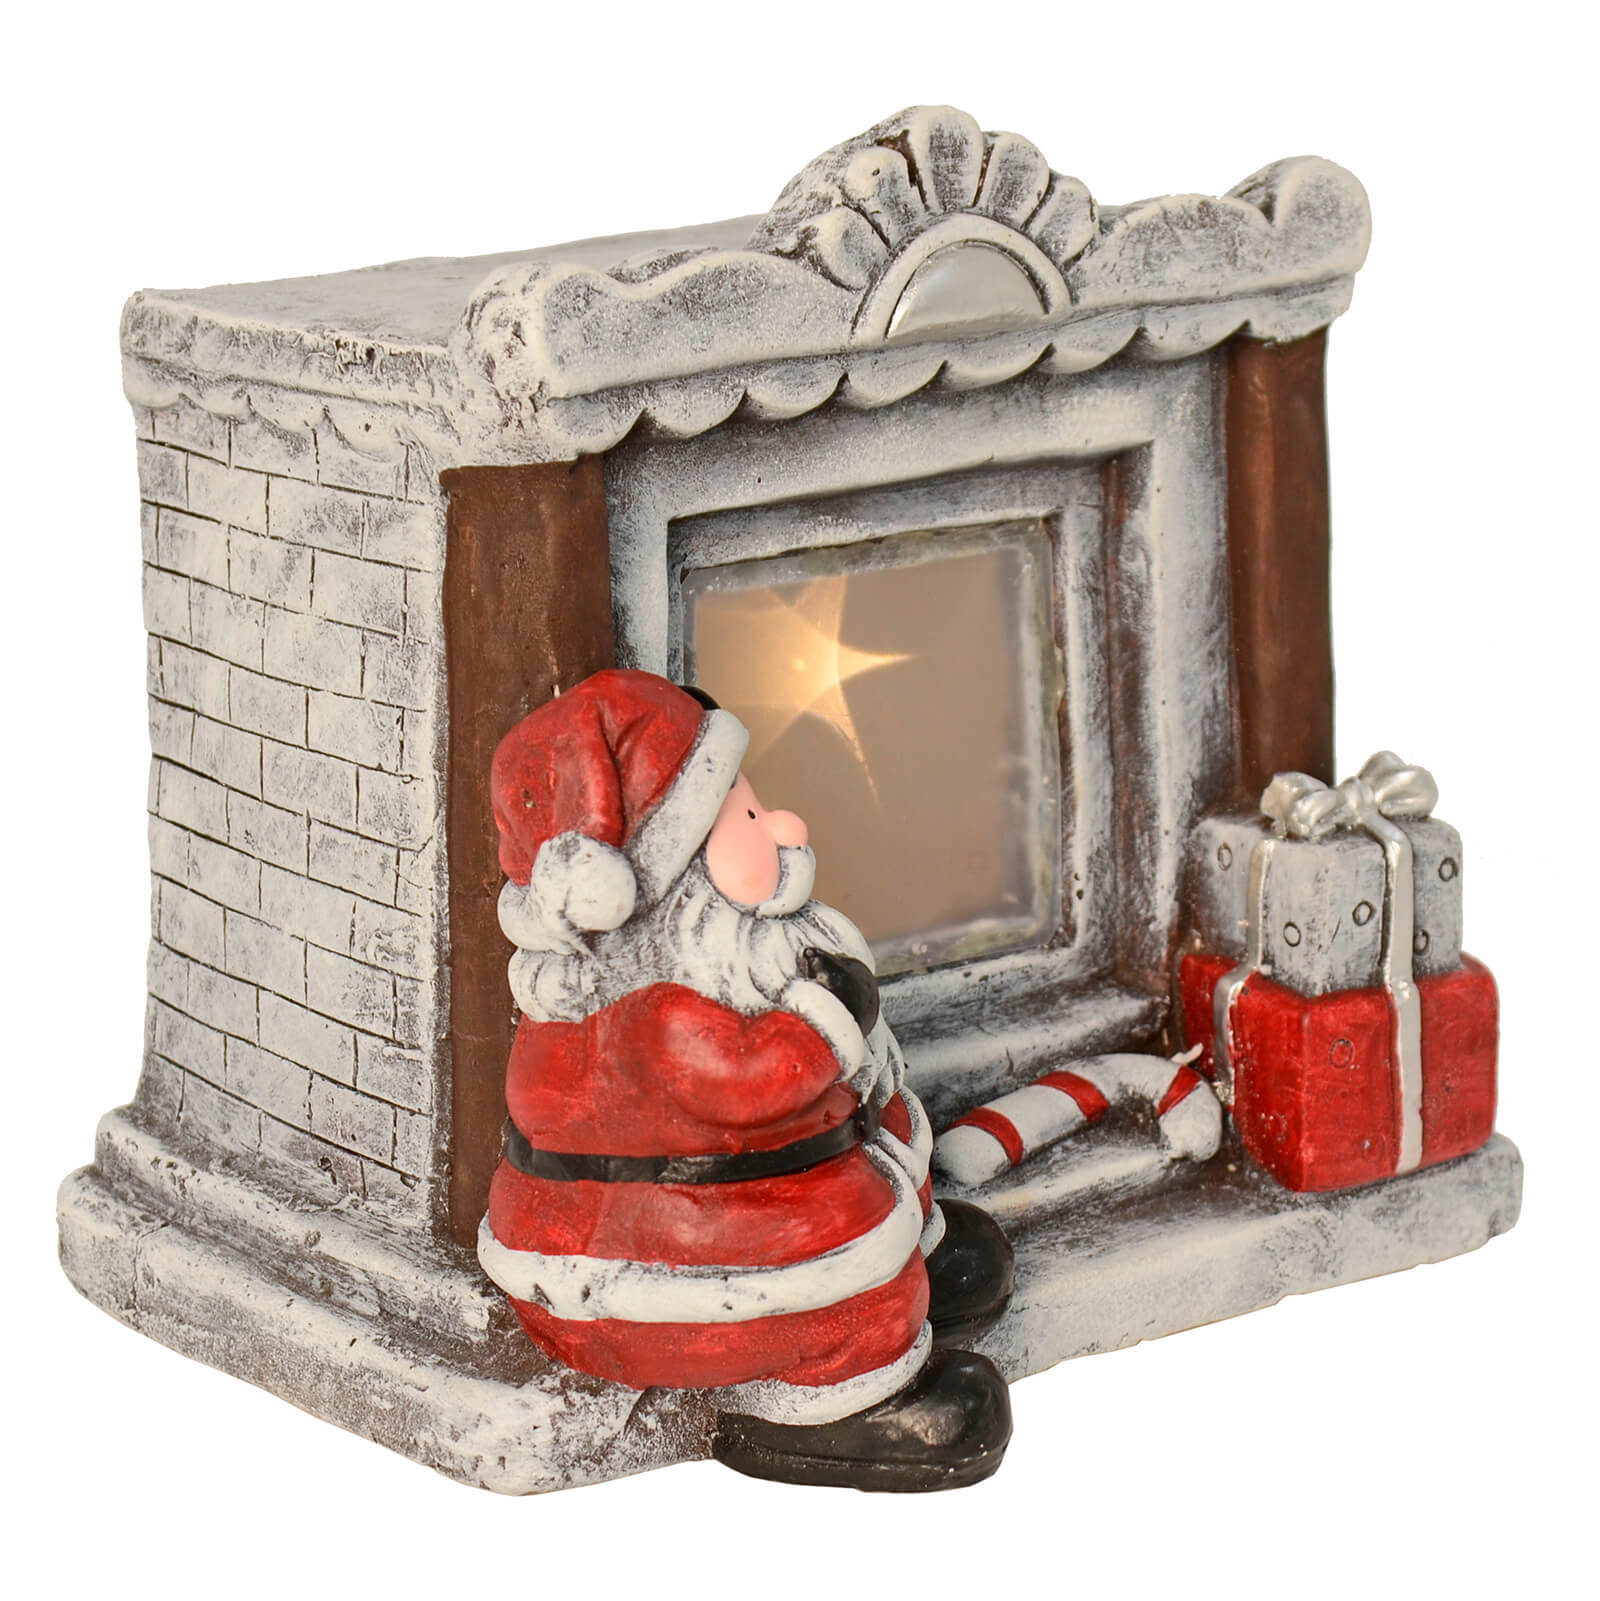 Side view of Santa Claus stitting at a fireplace Christmas ornament with light up stars, retro mantelpiece, stock, candy cane and Christmas presents